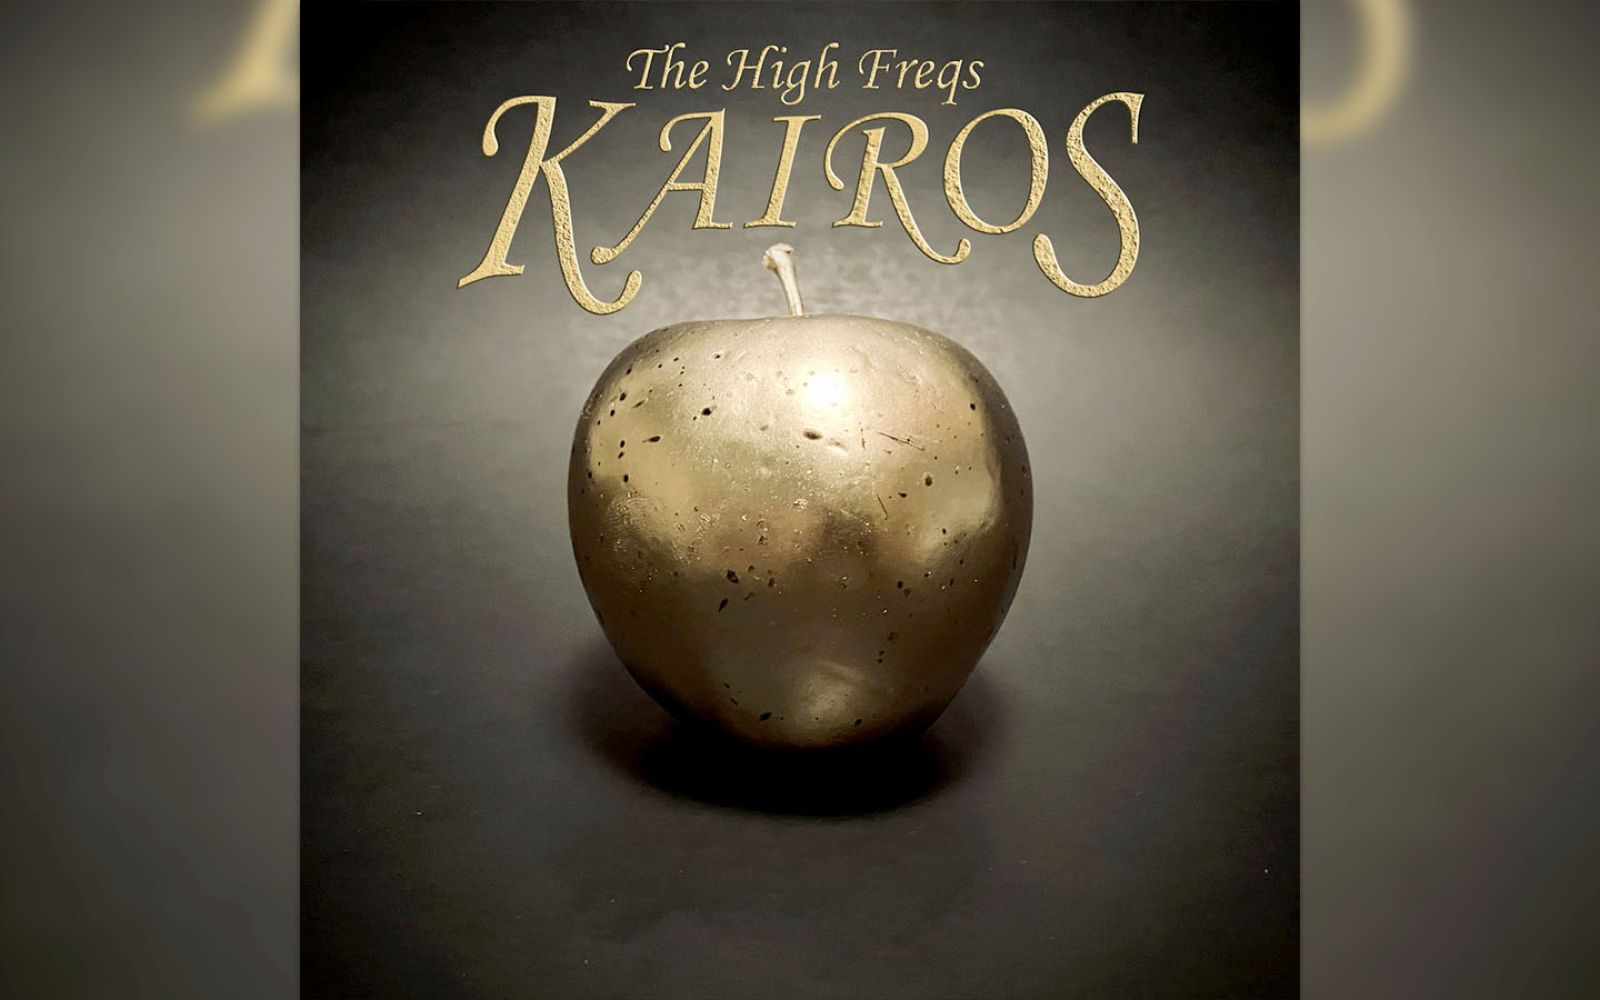 The High Freqs have released their debut EP, Kairos.